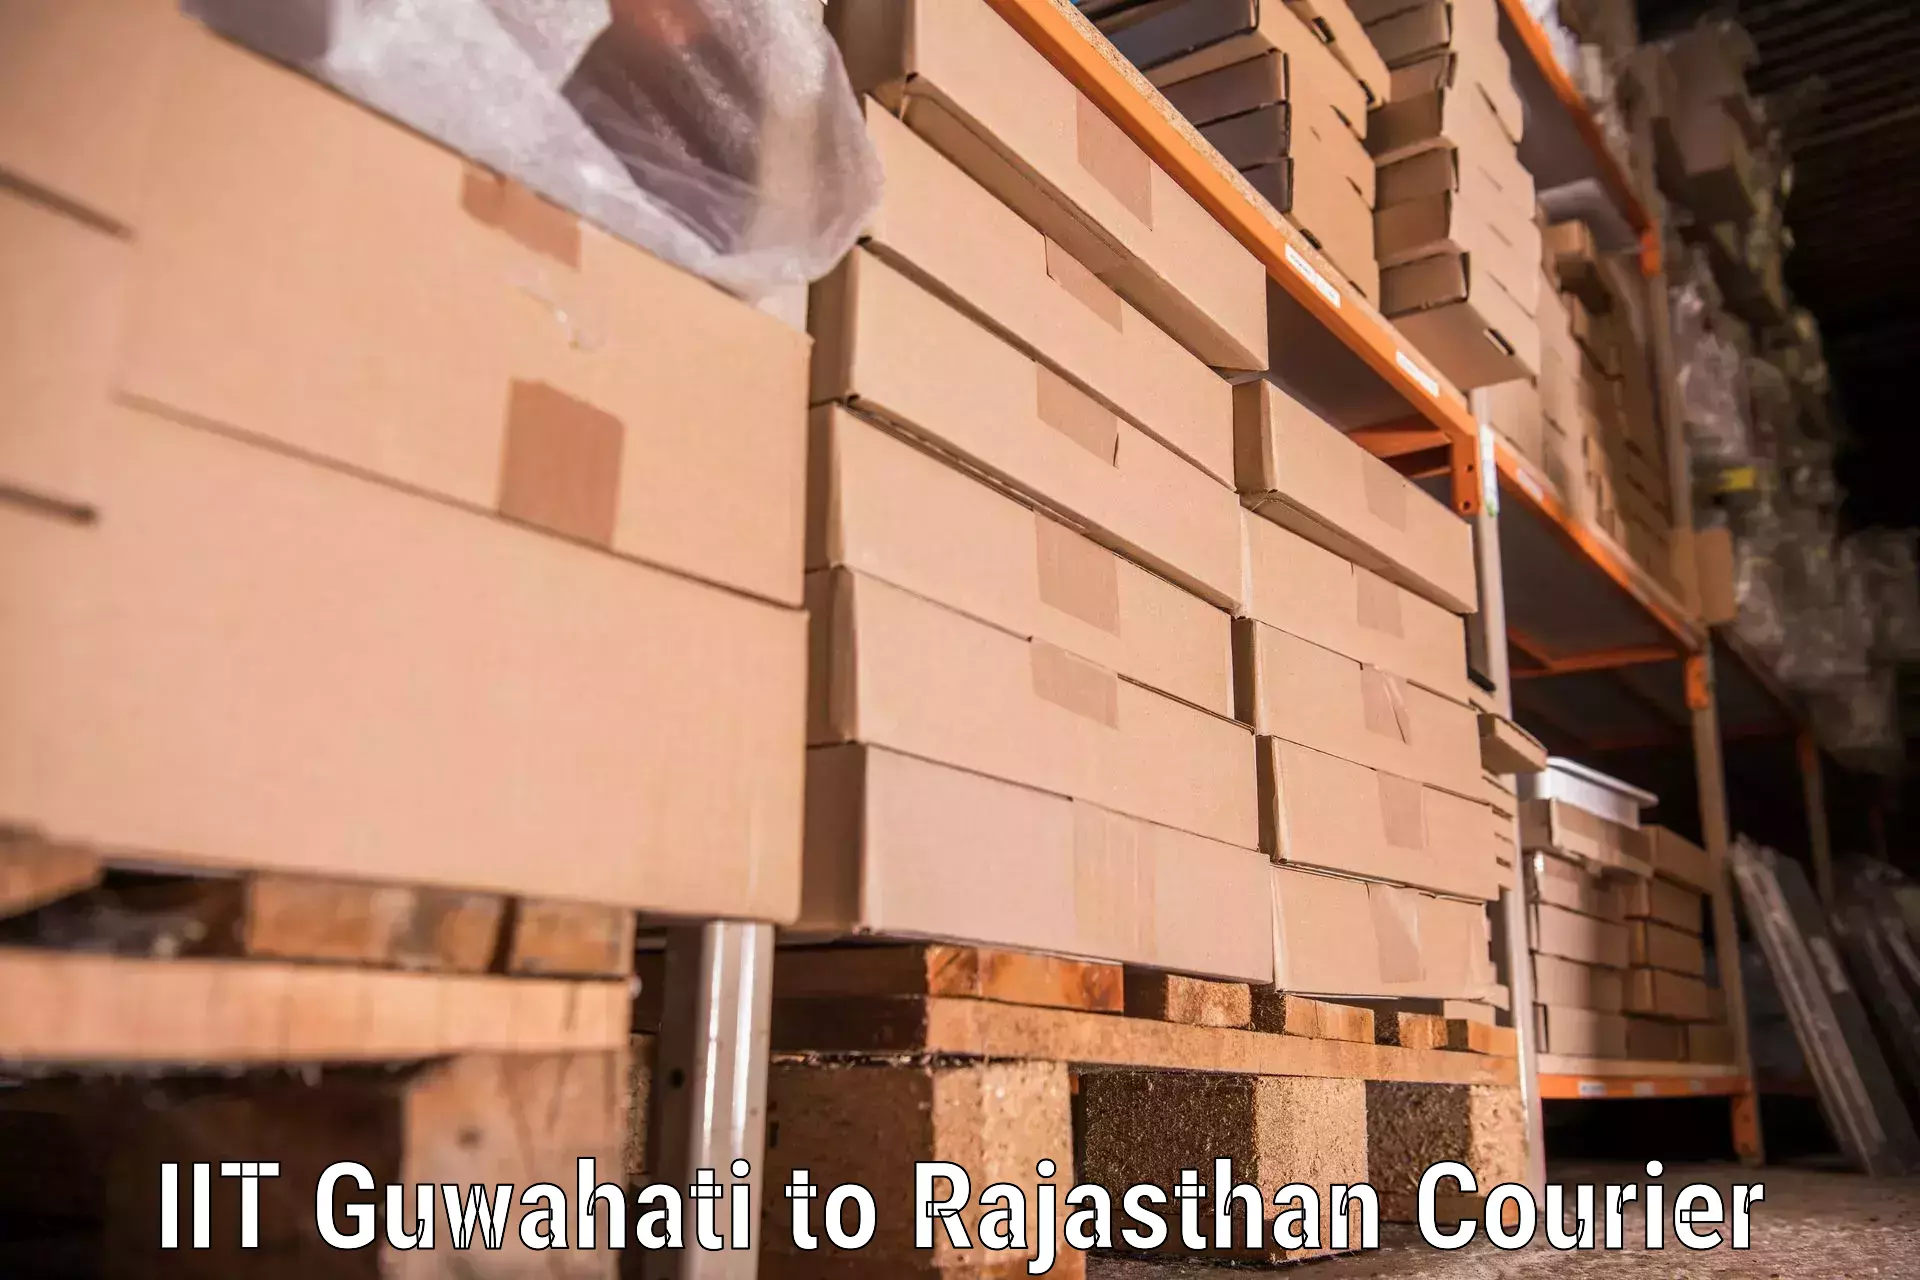 Quality relocation assistance IIT Guwahati to Rajasthan